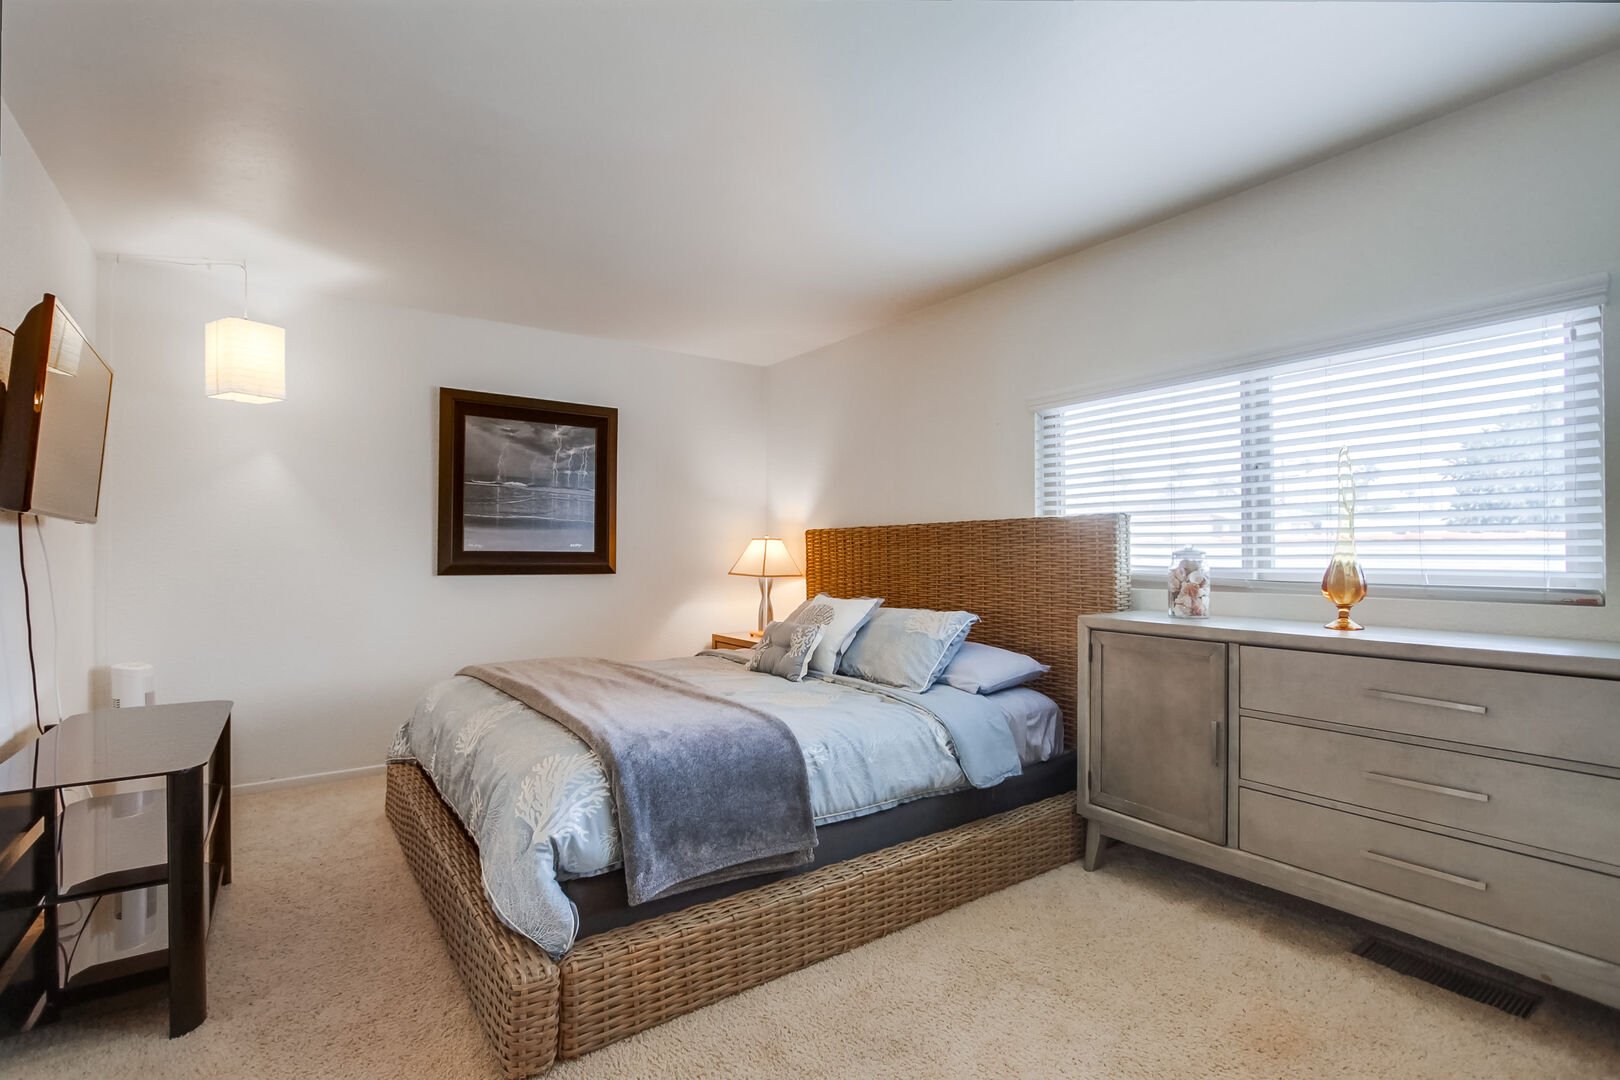 Upper level master bedroom with king size bed, dresser storage, large walk-in closet, smart TV with streaming and in-suite full bathroom